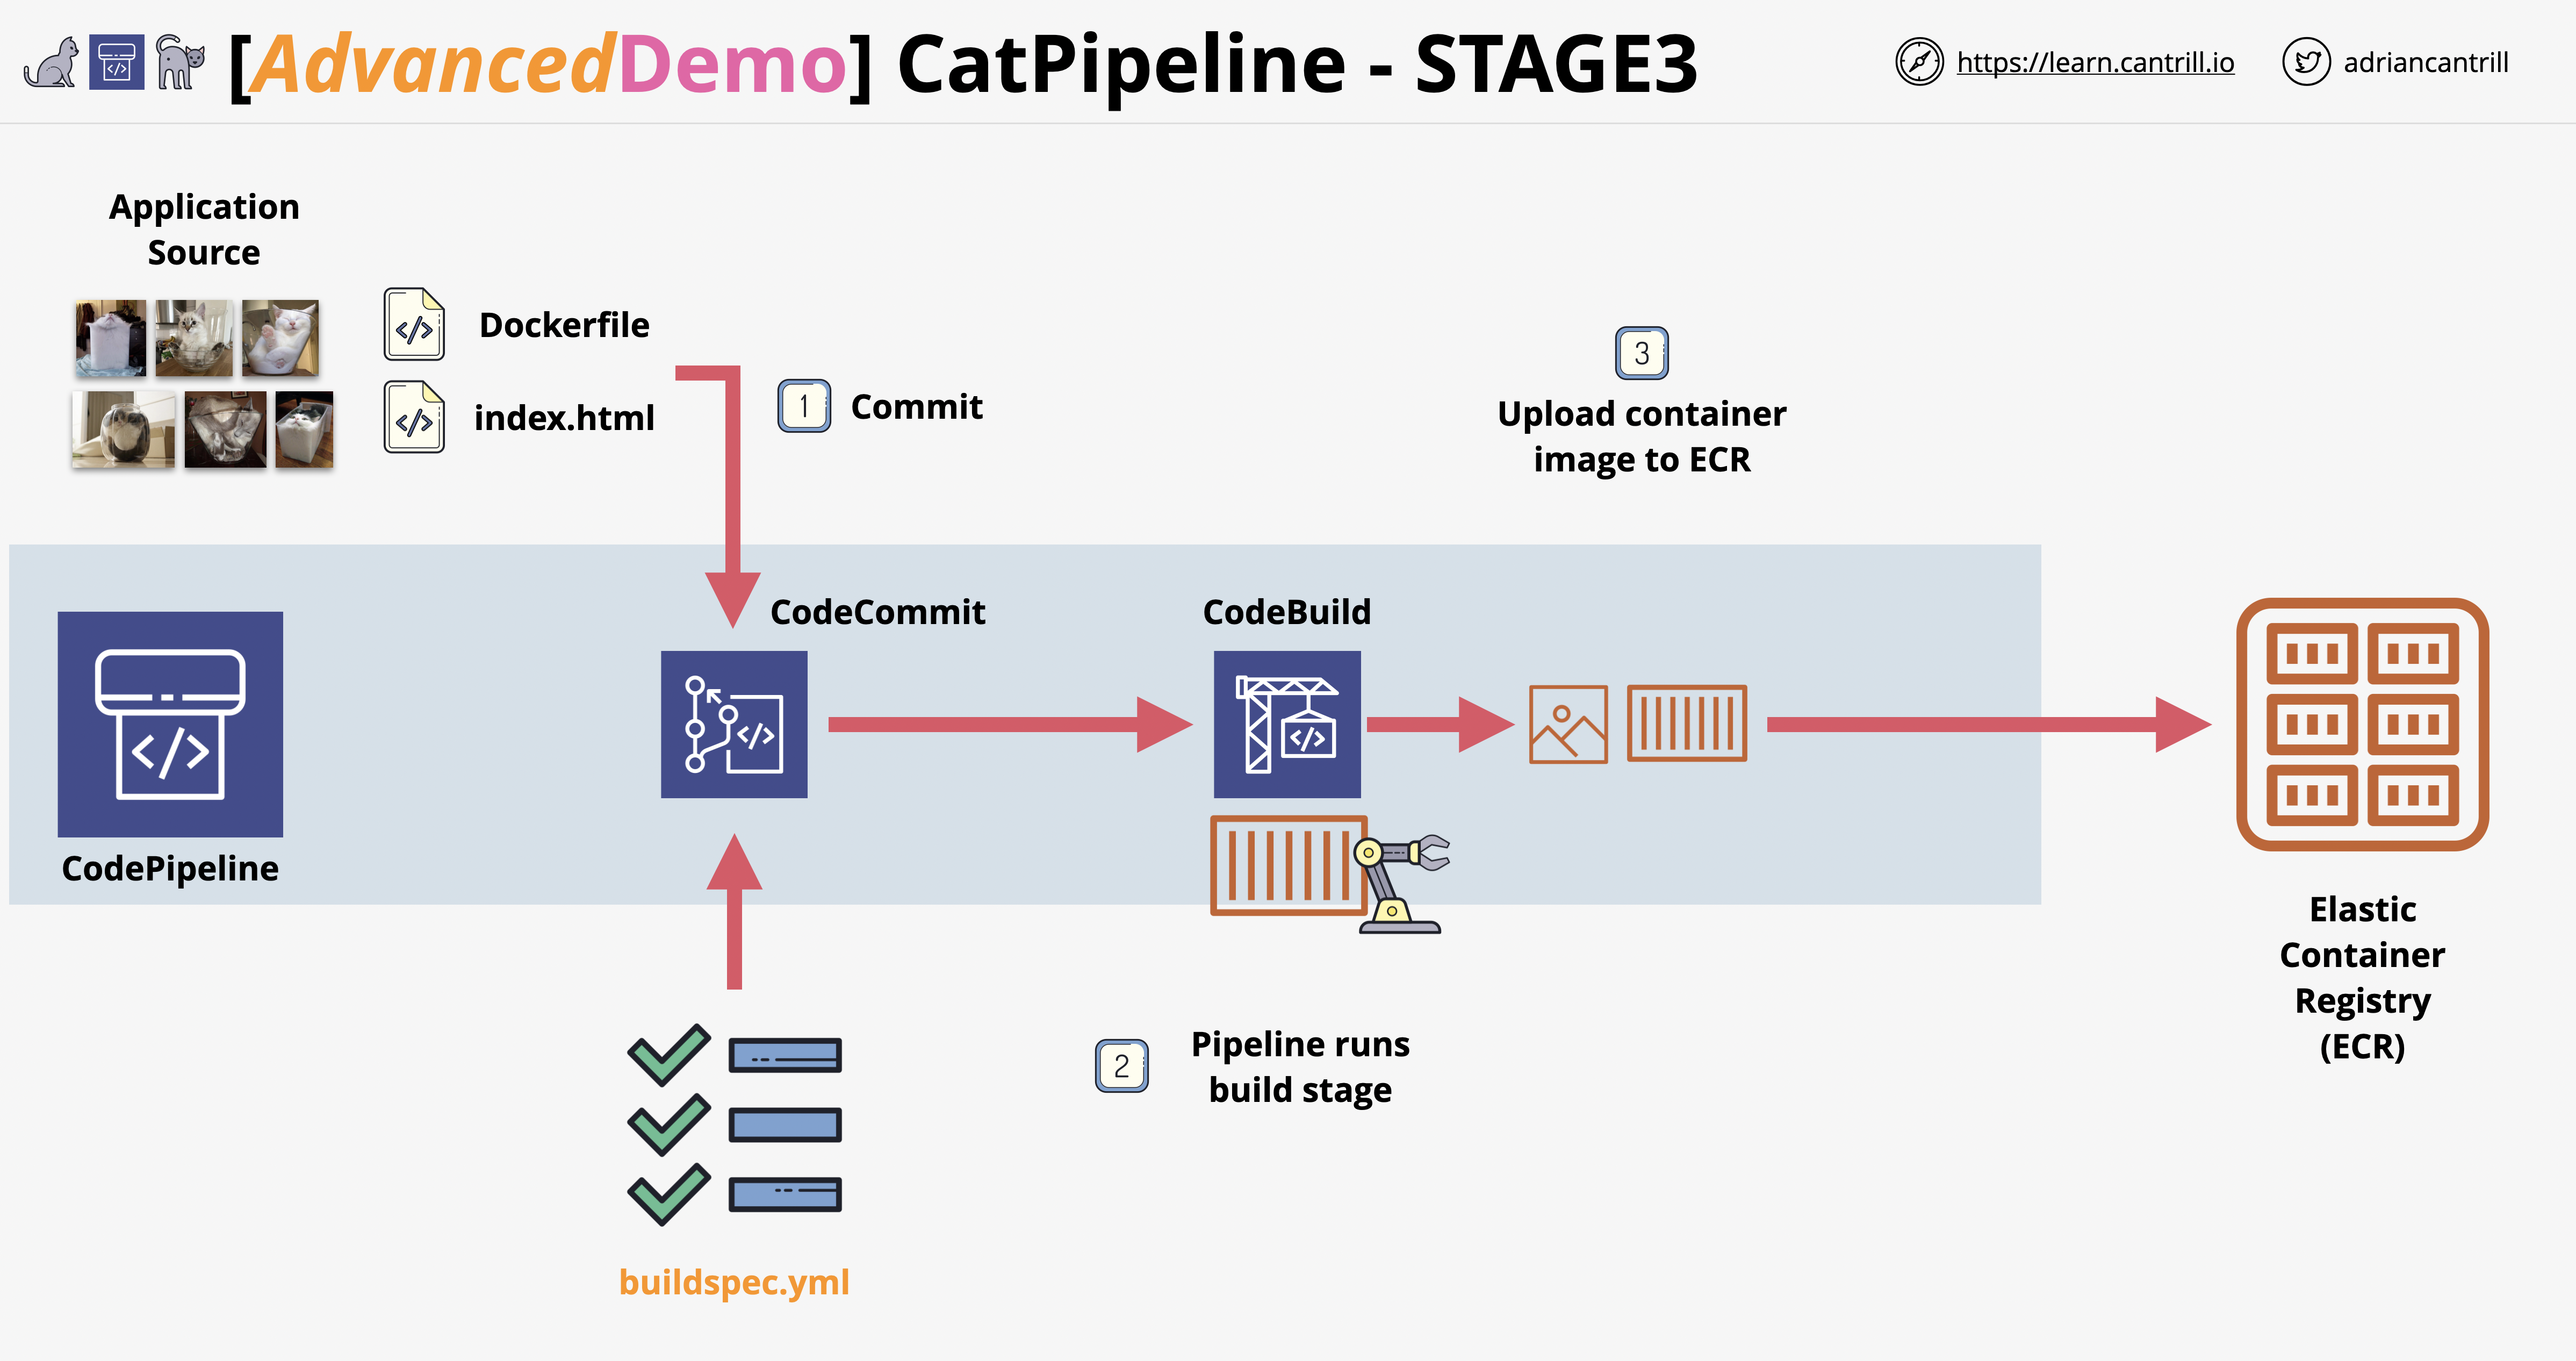 catpipeline-arch-stage3.png